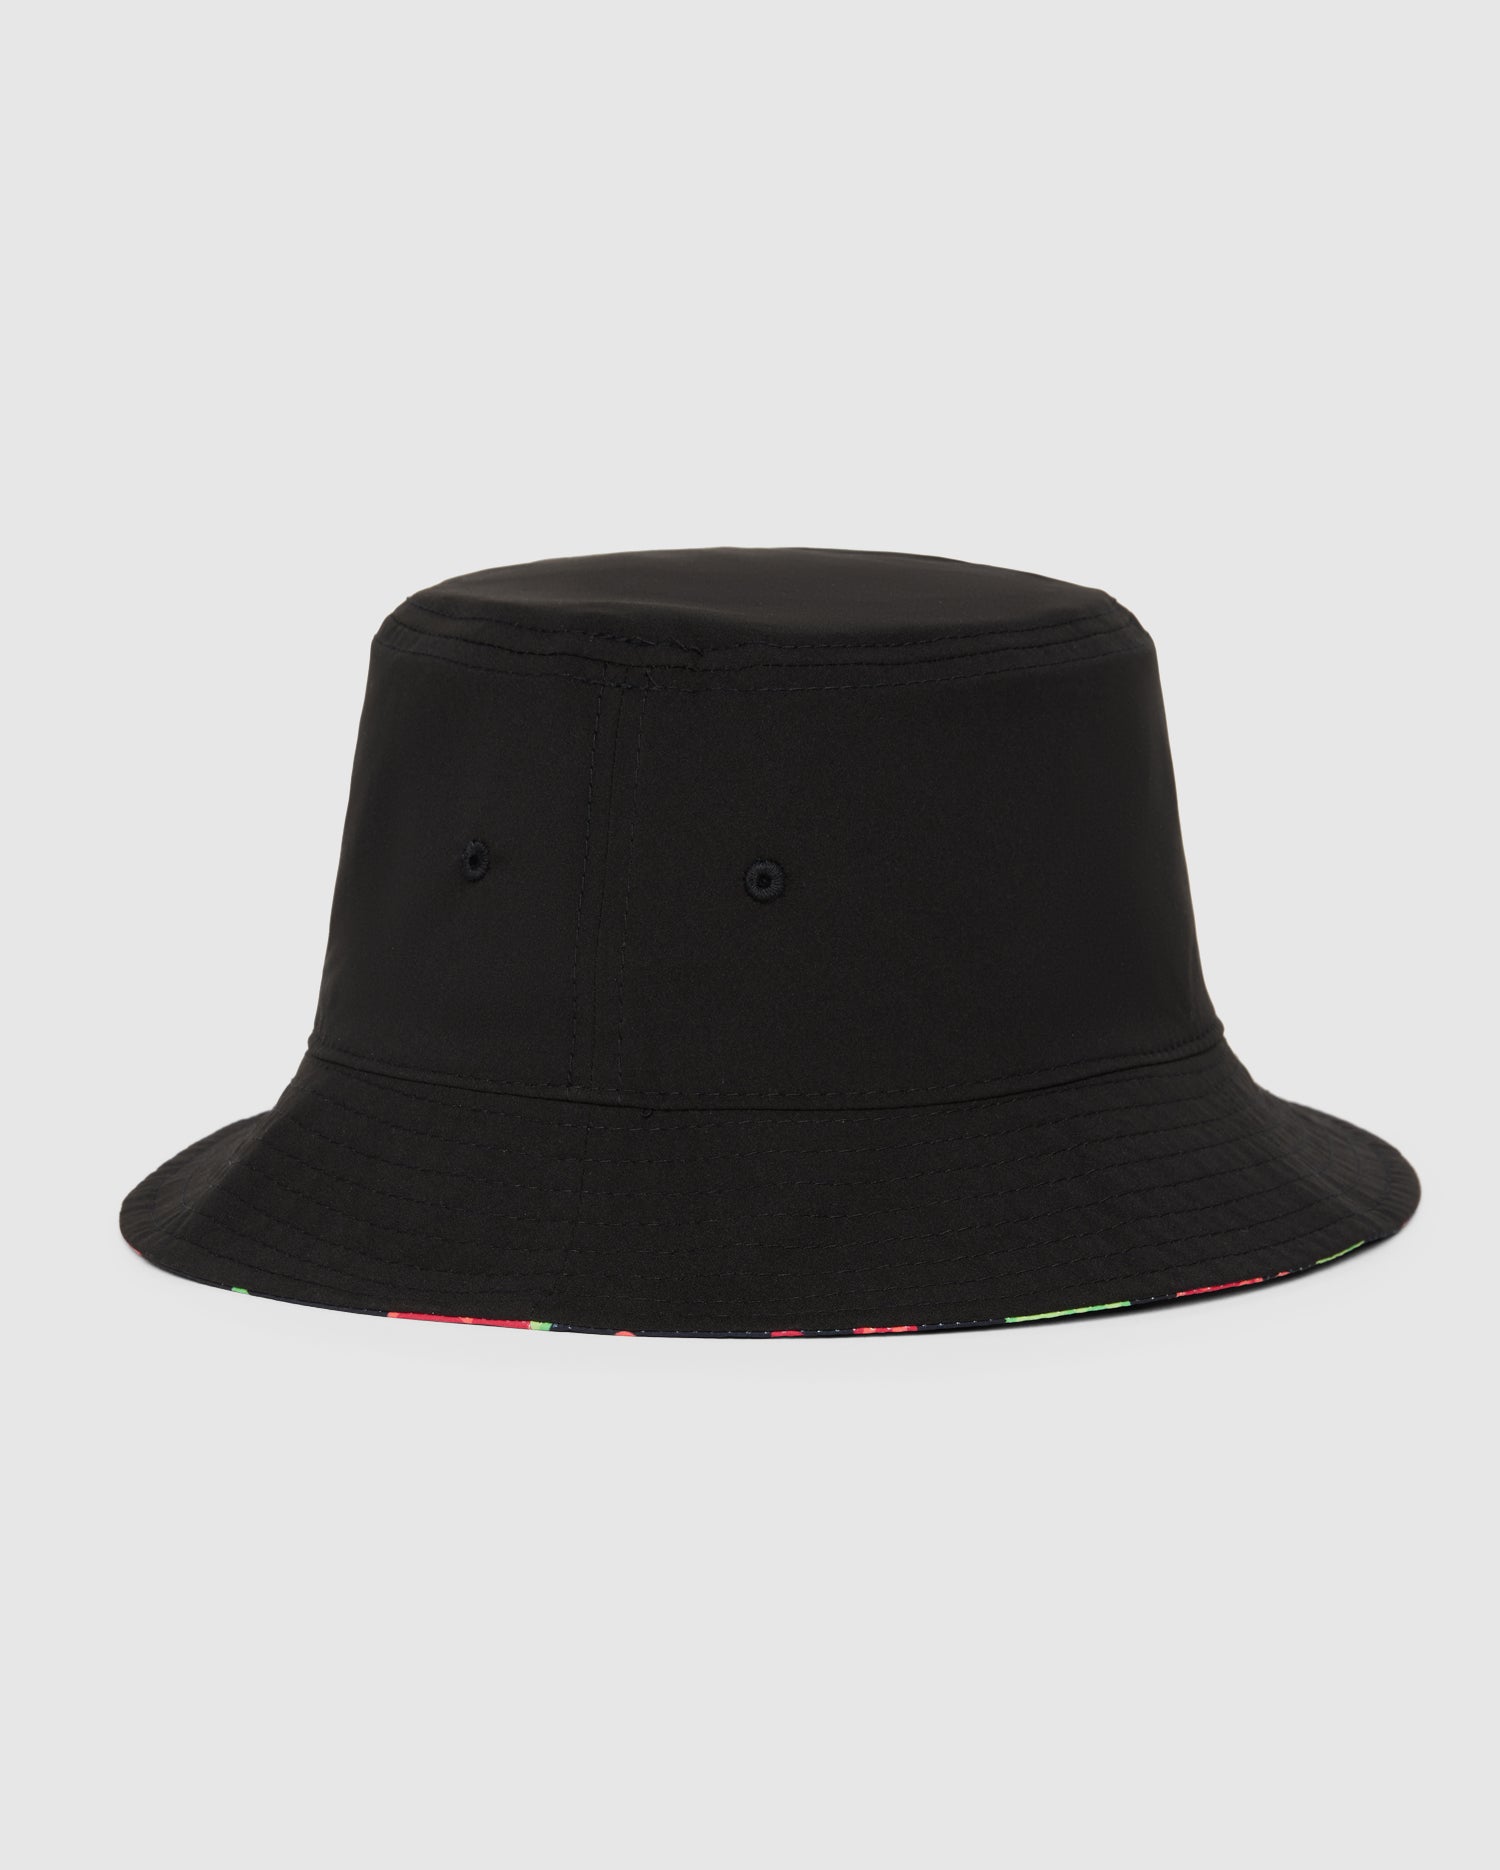 MENS ARVIN REVERSIBLE BUCKET HAT - B6A741A2HT